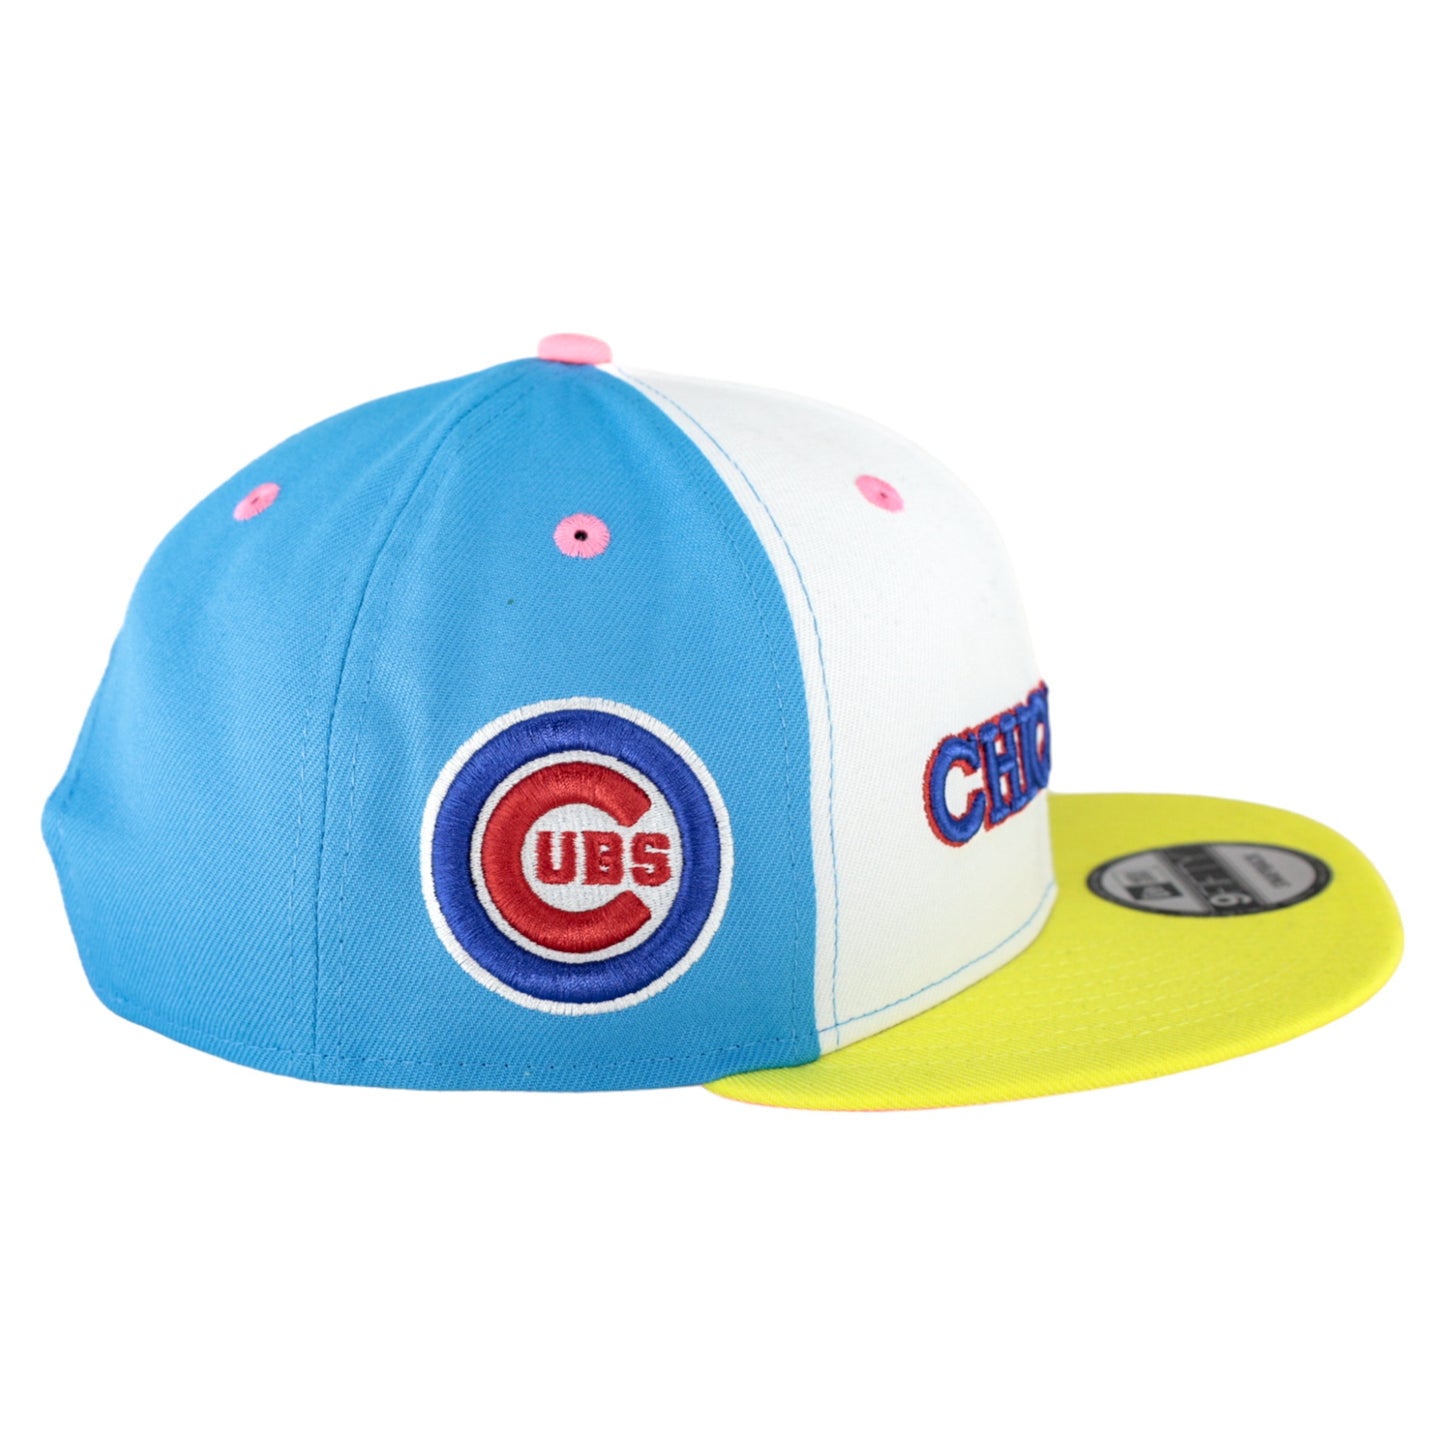 Chicago Cubs Neon/Pink/Yellow New Era 9FIFTY Snapback Hat